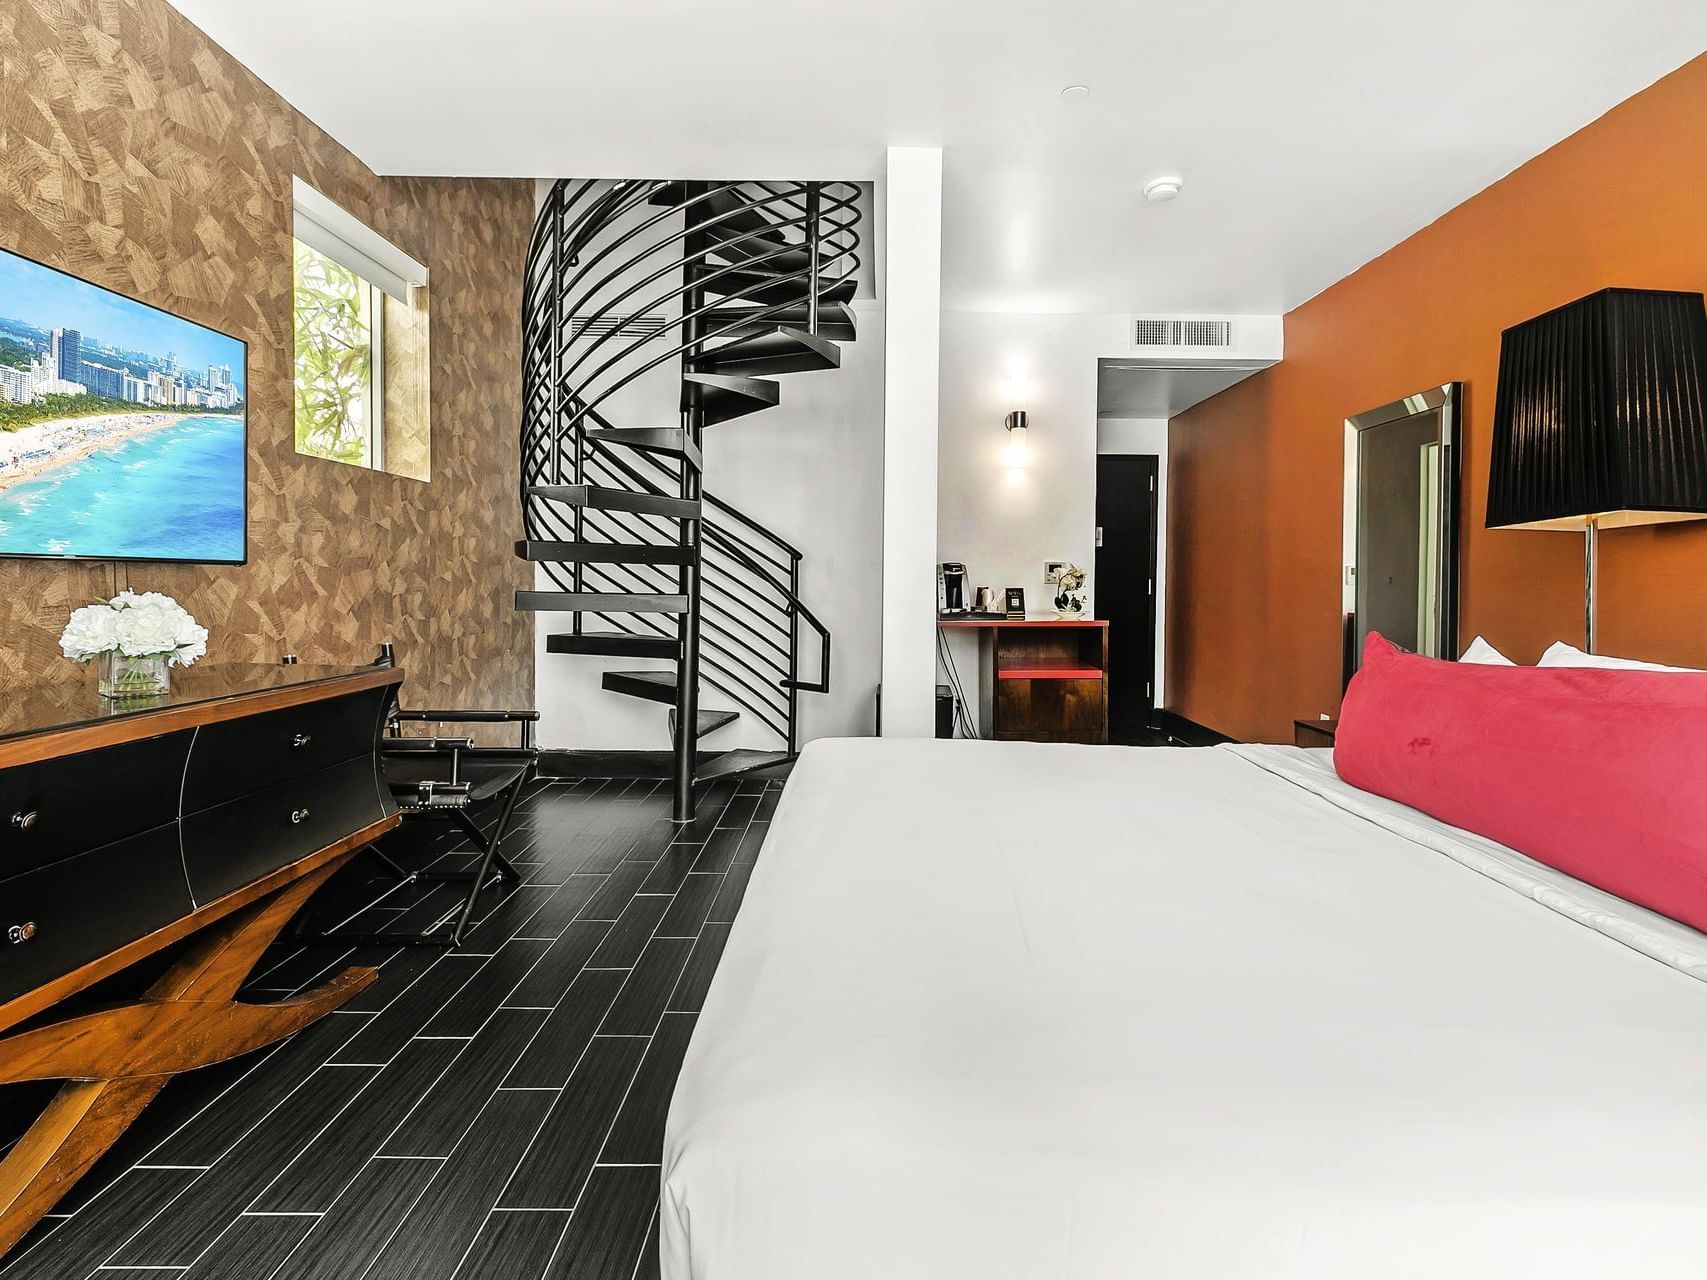 King-size bed, TV, and a spiral staircase to the rooftop in Premium King with Rooftop Terrace at Fairwind Hotel Miami